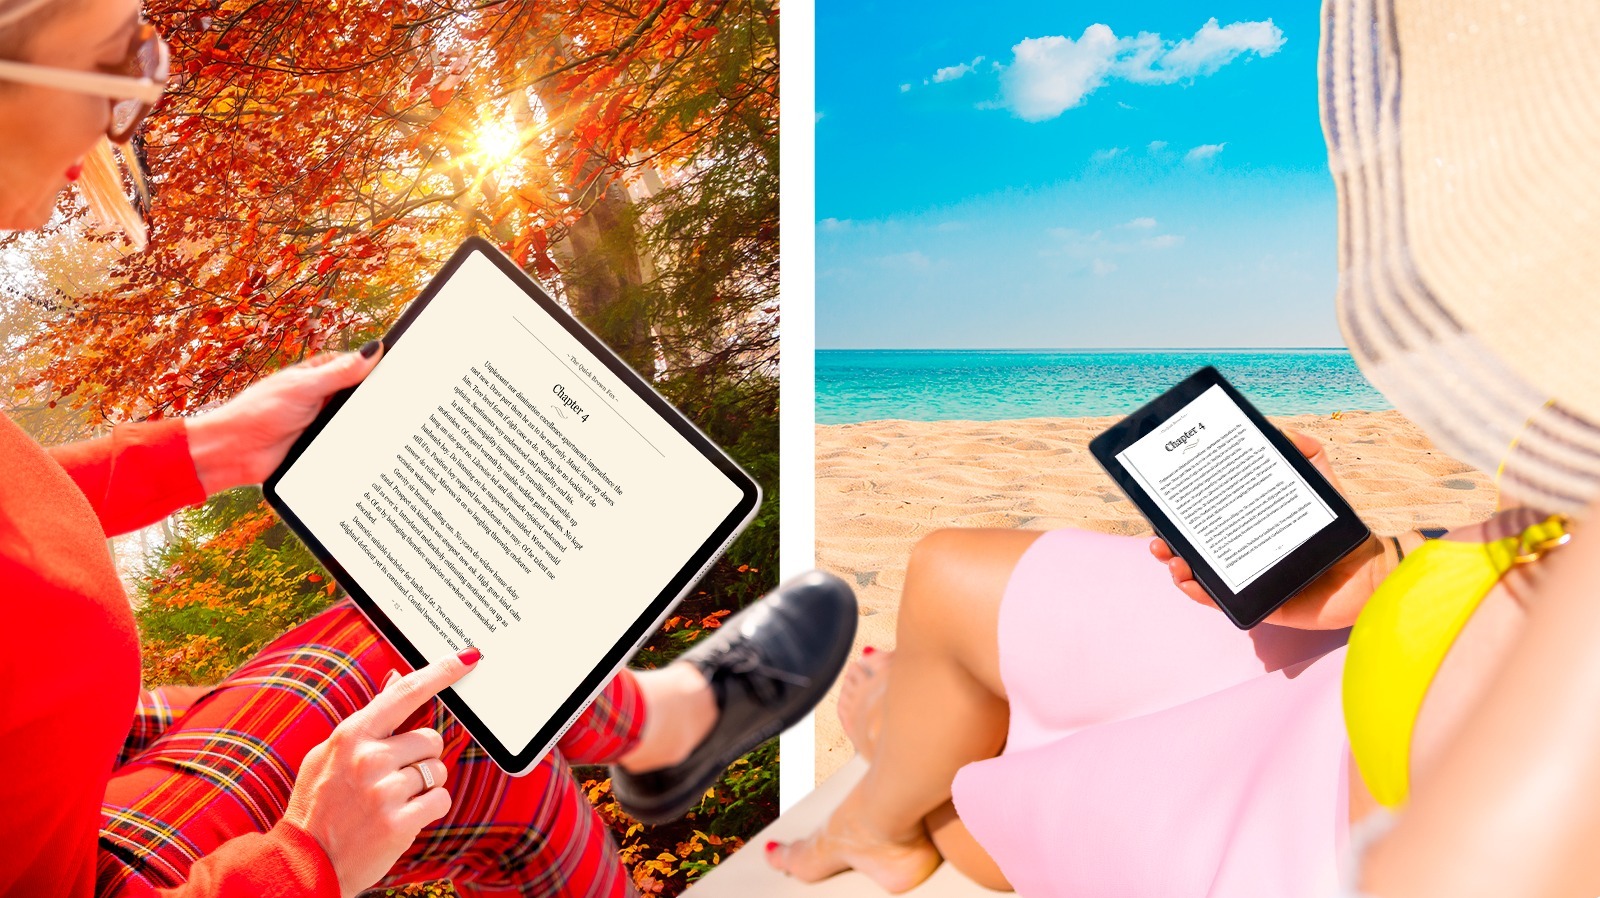 How to Get the Most Out of Kindle Unlimited: Ultimate Reading